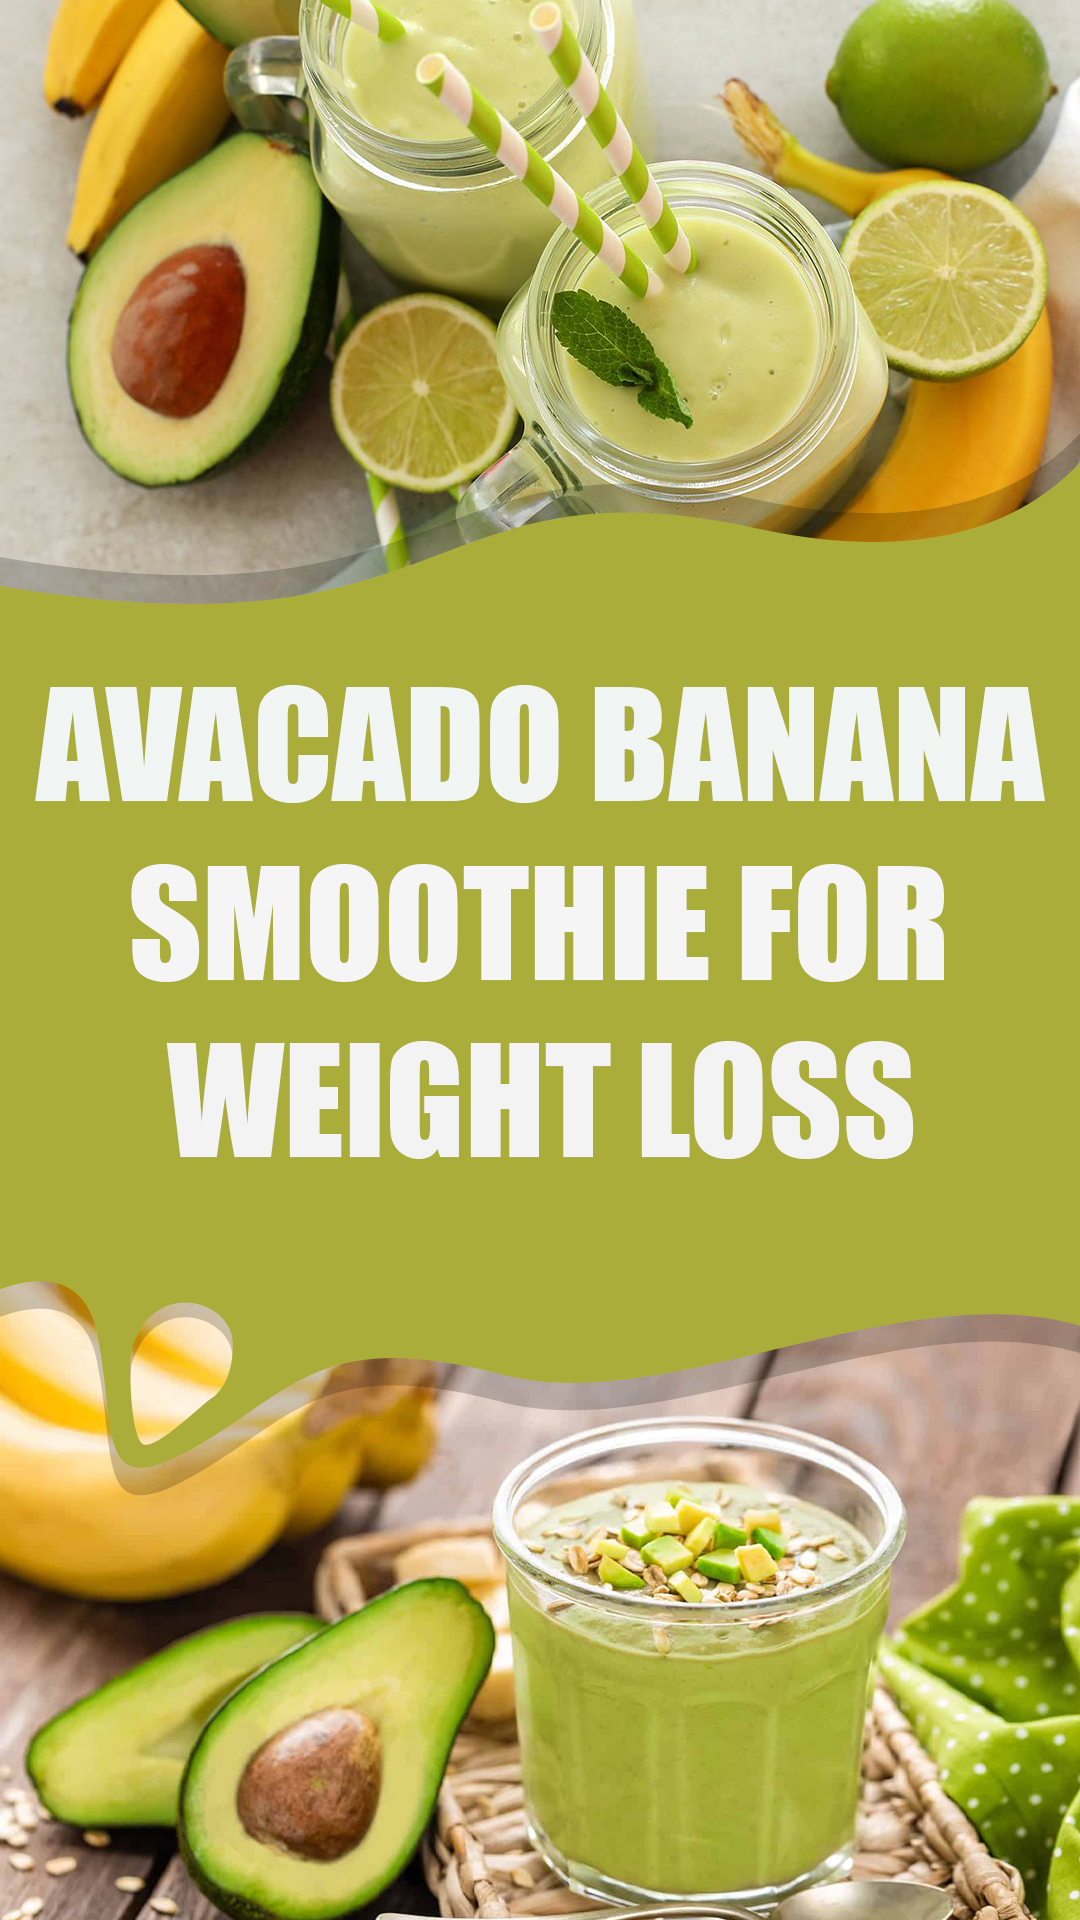 Avocado and Banana Smoothie for Weight Loss